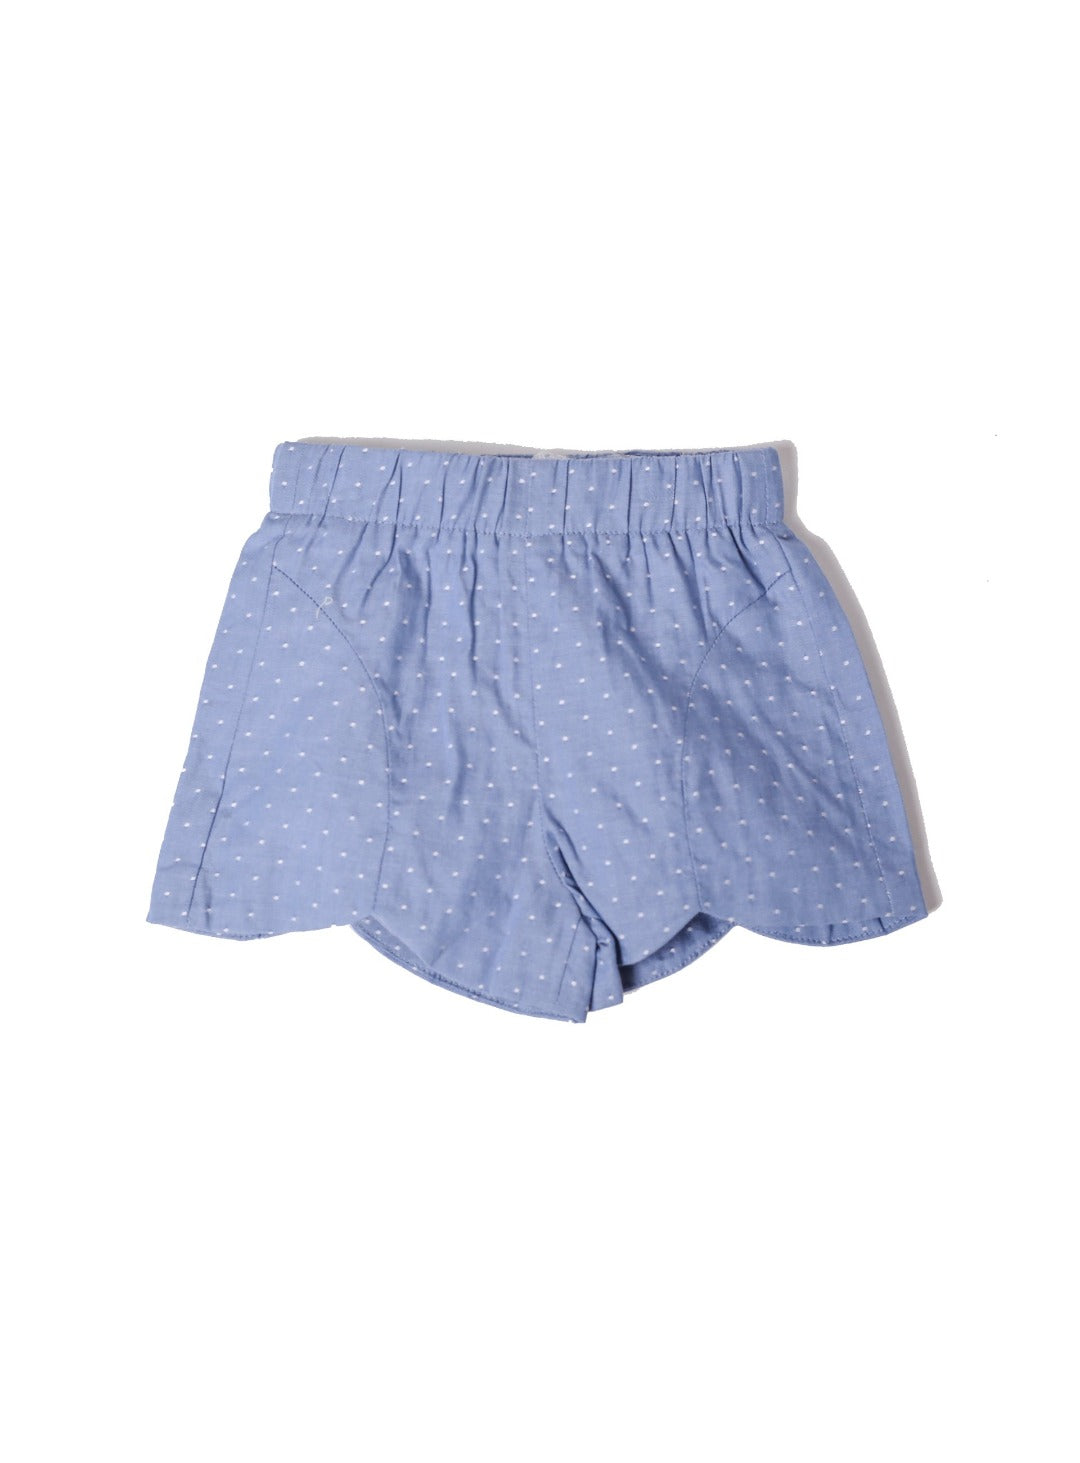 washed blue shorts with mini white dots